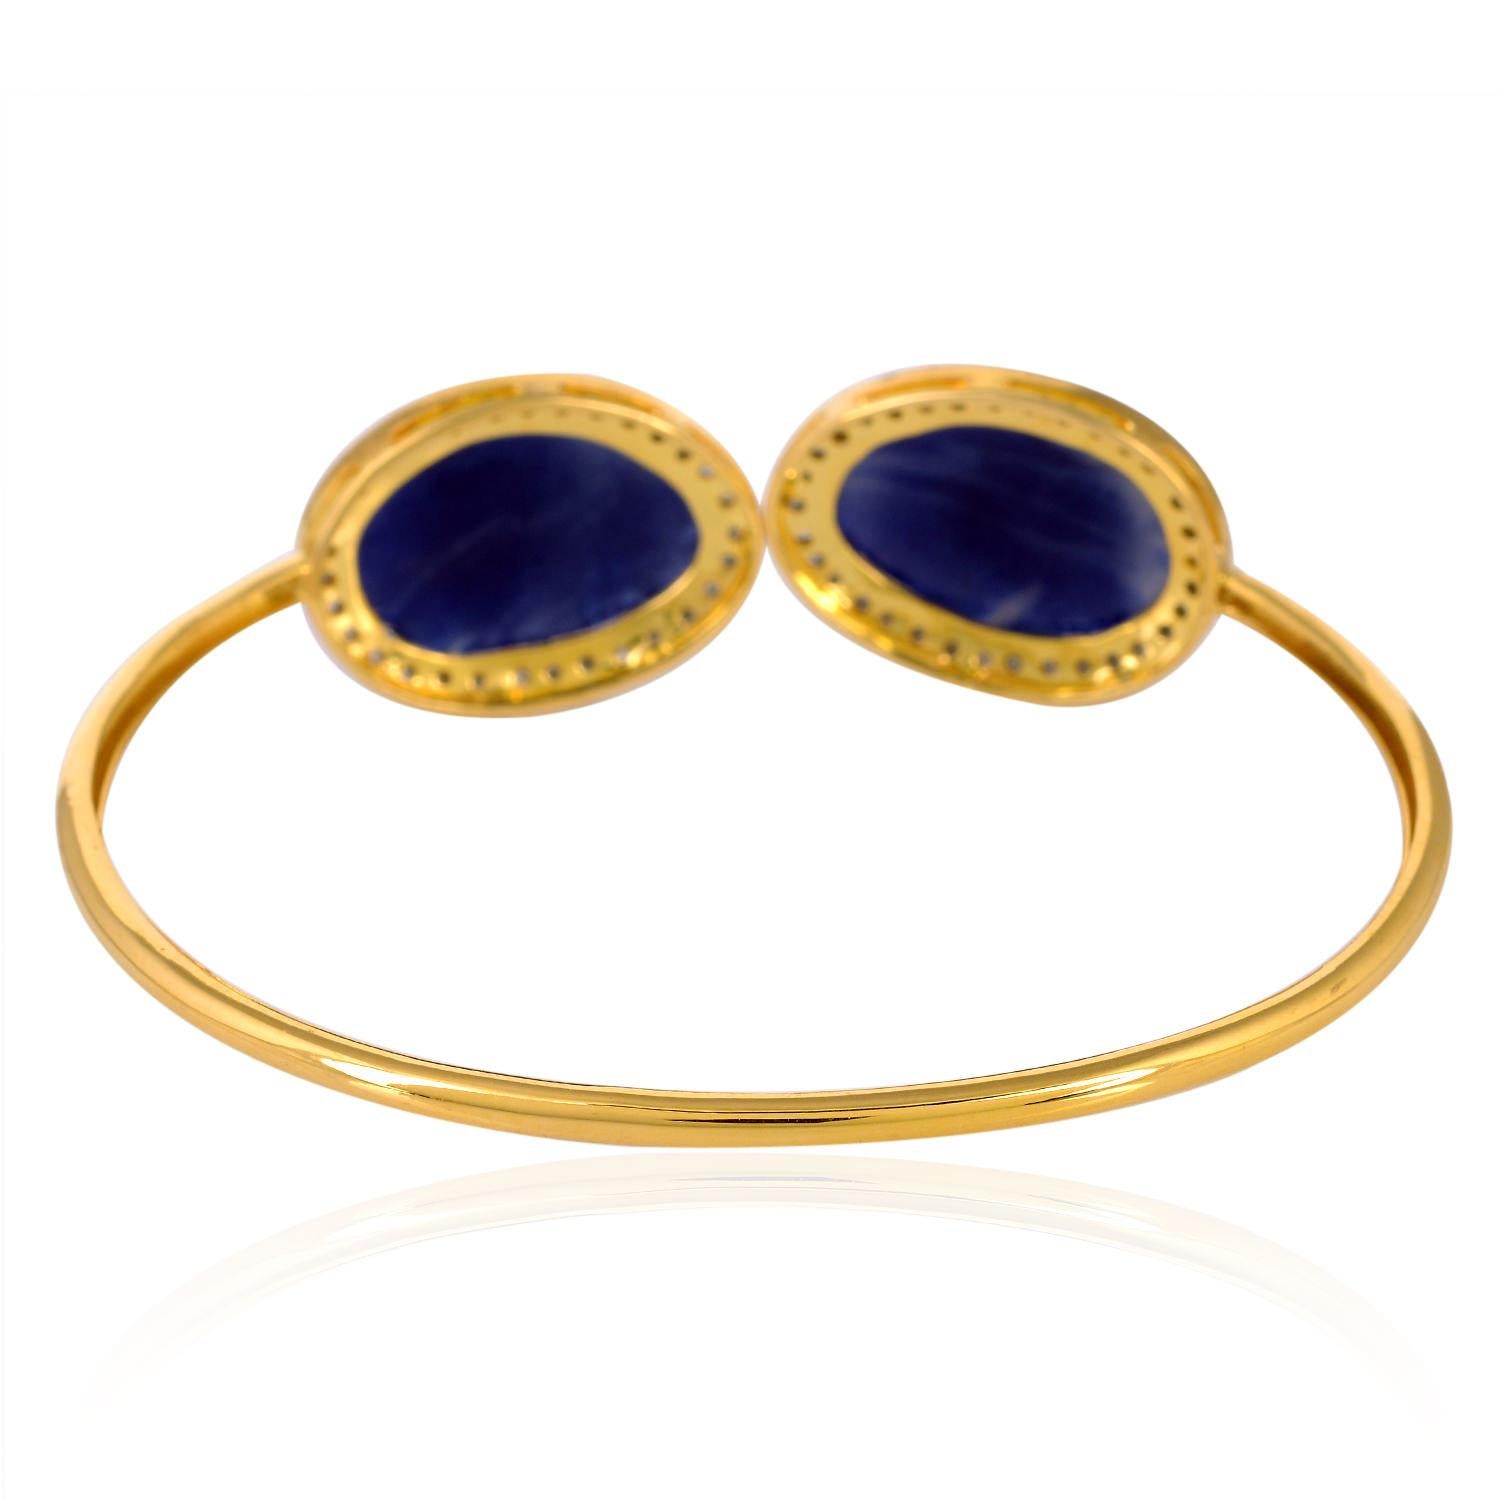 Modern Designer Cuff Bracelet with Blue Sapphire Stones Surrounded by Pave Diamonds For Sale